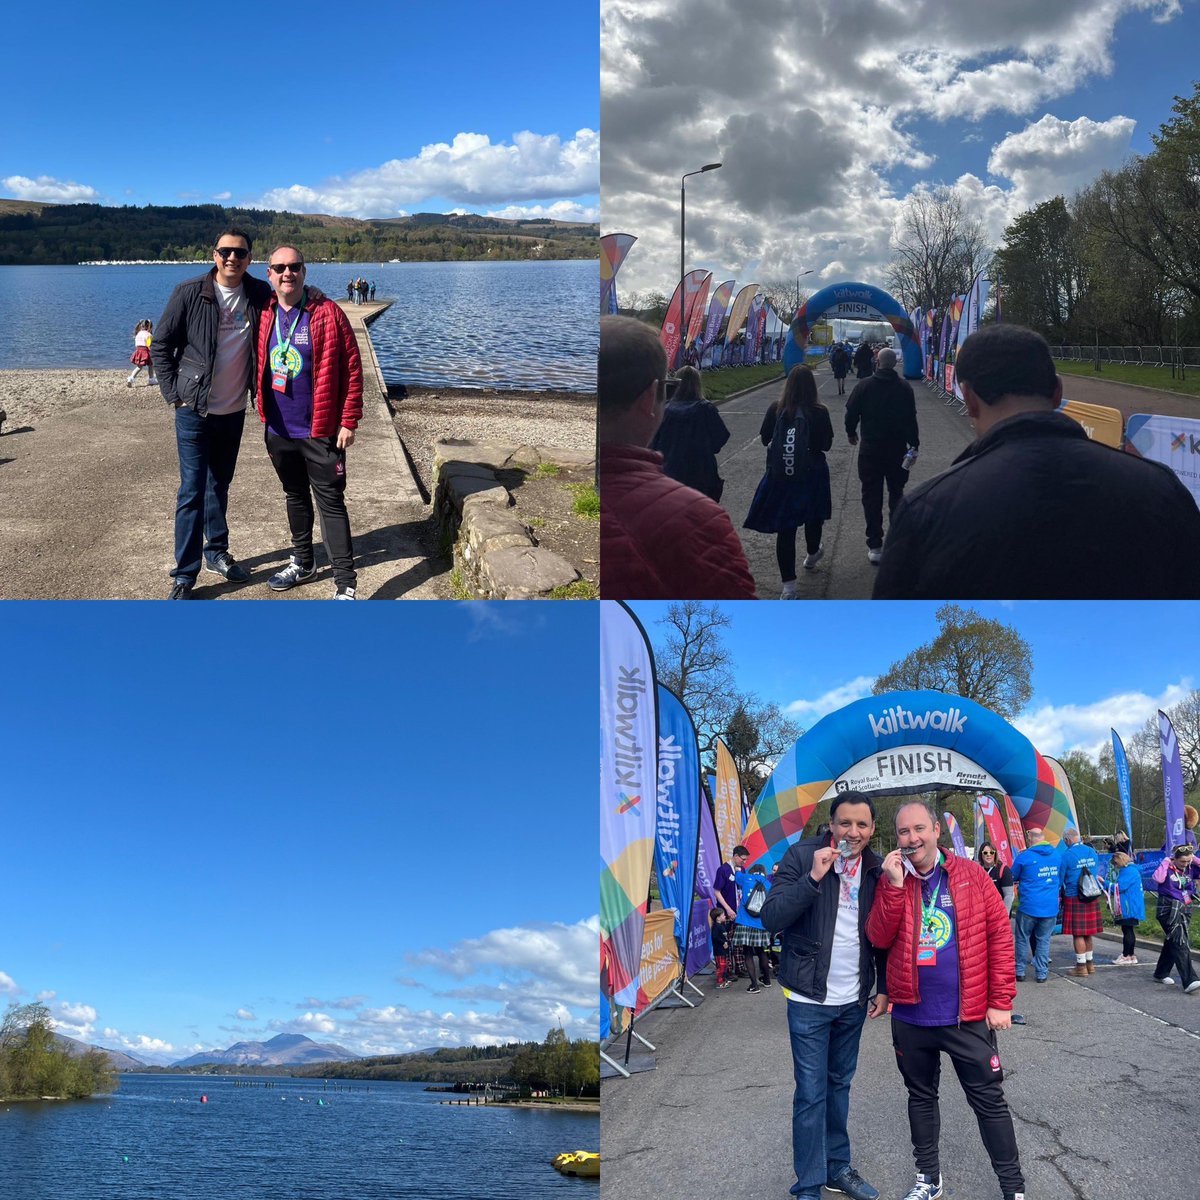 Great day for the @thekiltwalk ☀️ with @AnasSarwar - well done to @SirTomhunter @PaulCooneyKW and whole team who make it happen! Great to see so many fantastic causes being supported including @supportCHAS and the amazing team from Another Star in the Sky 🌟 for @GCH_Charity 💜